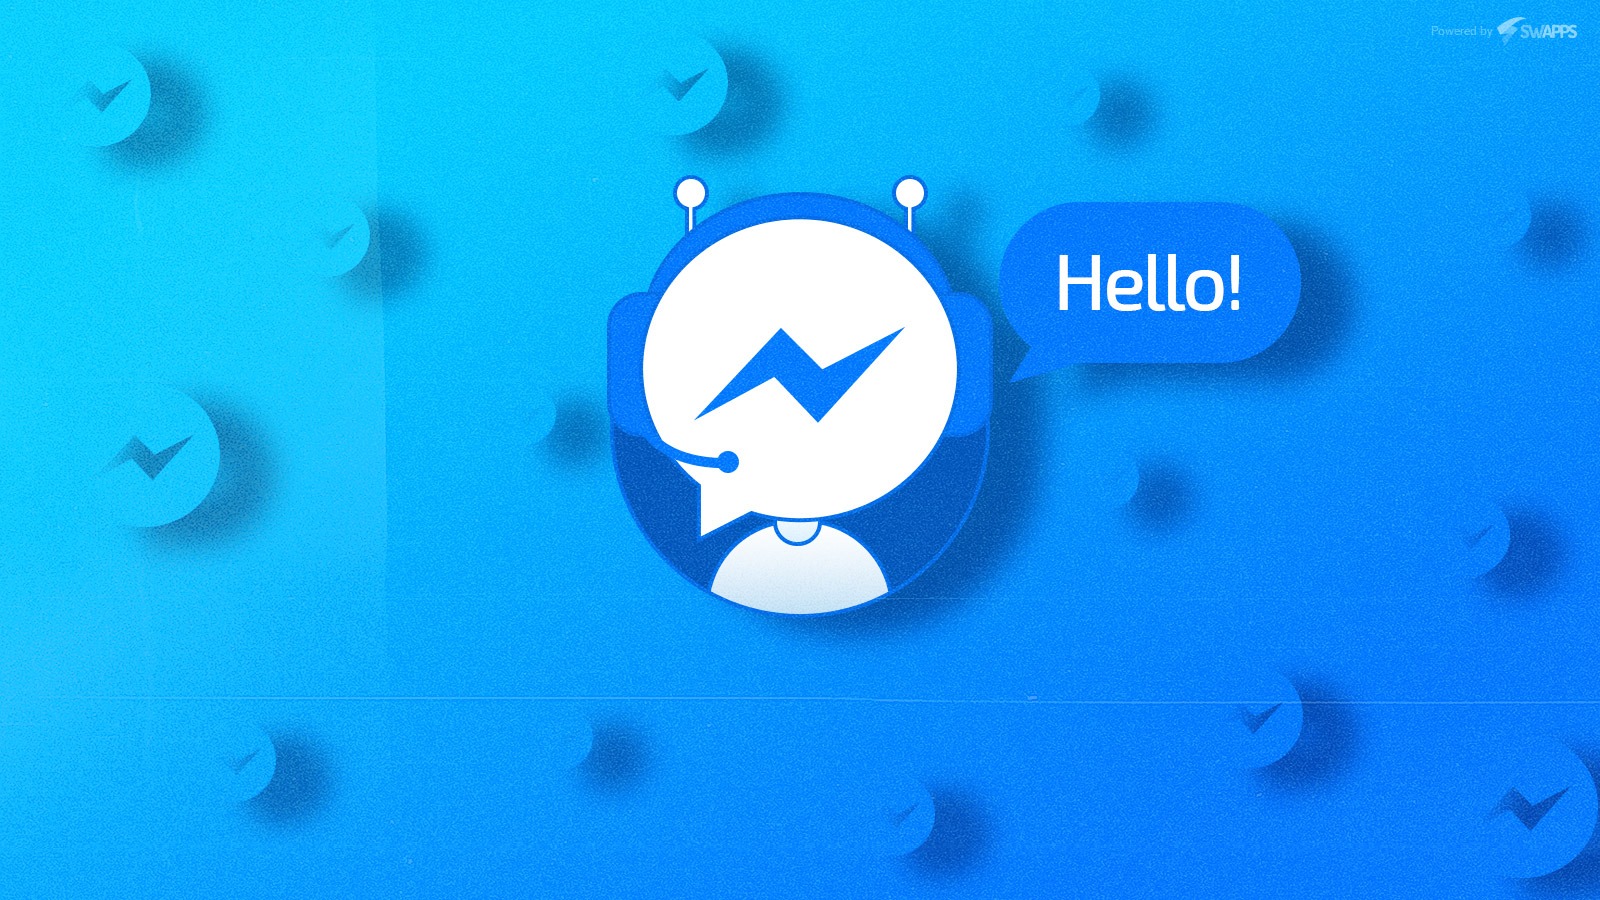 How to implement a basic Facebook Messenger chatbot